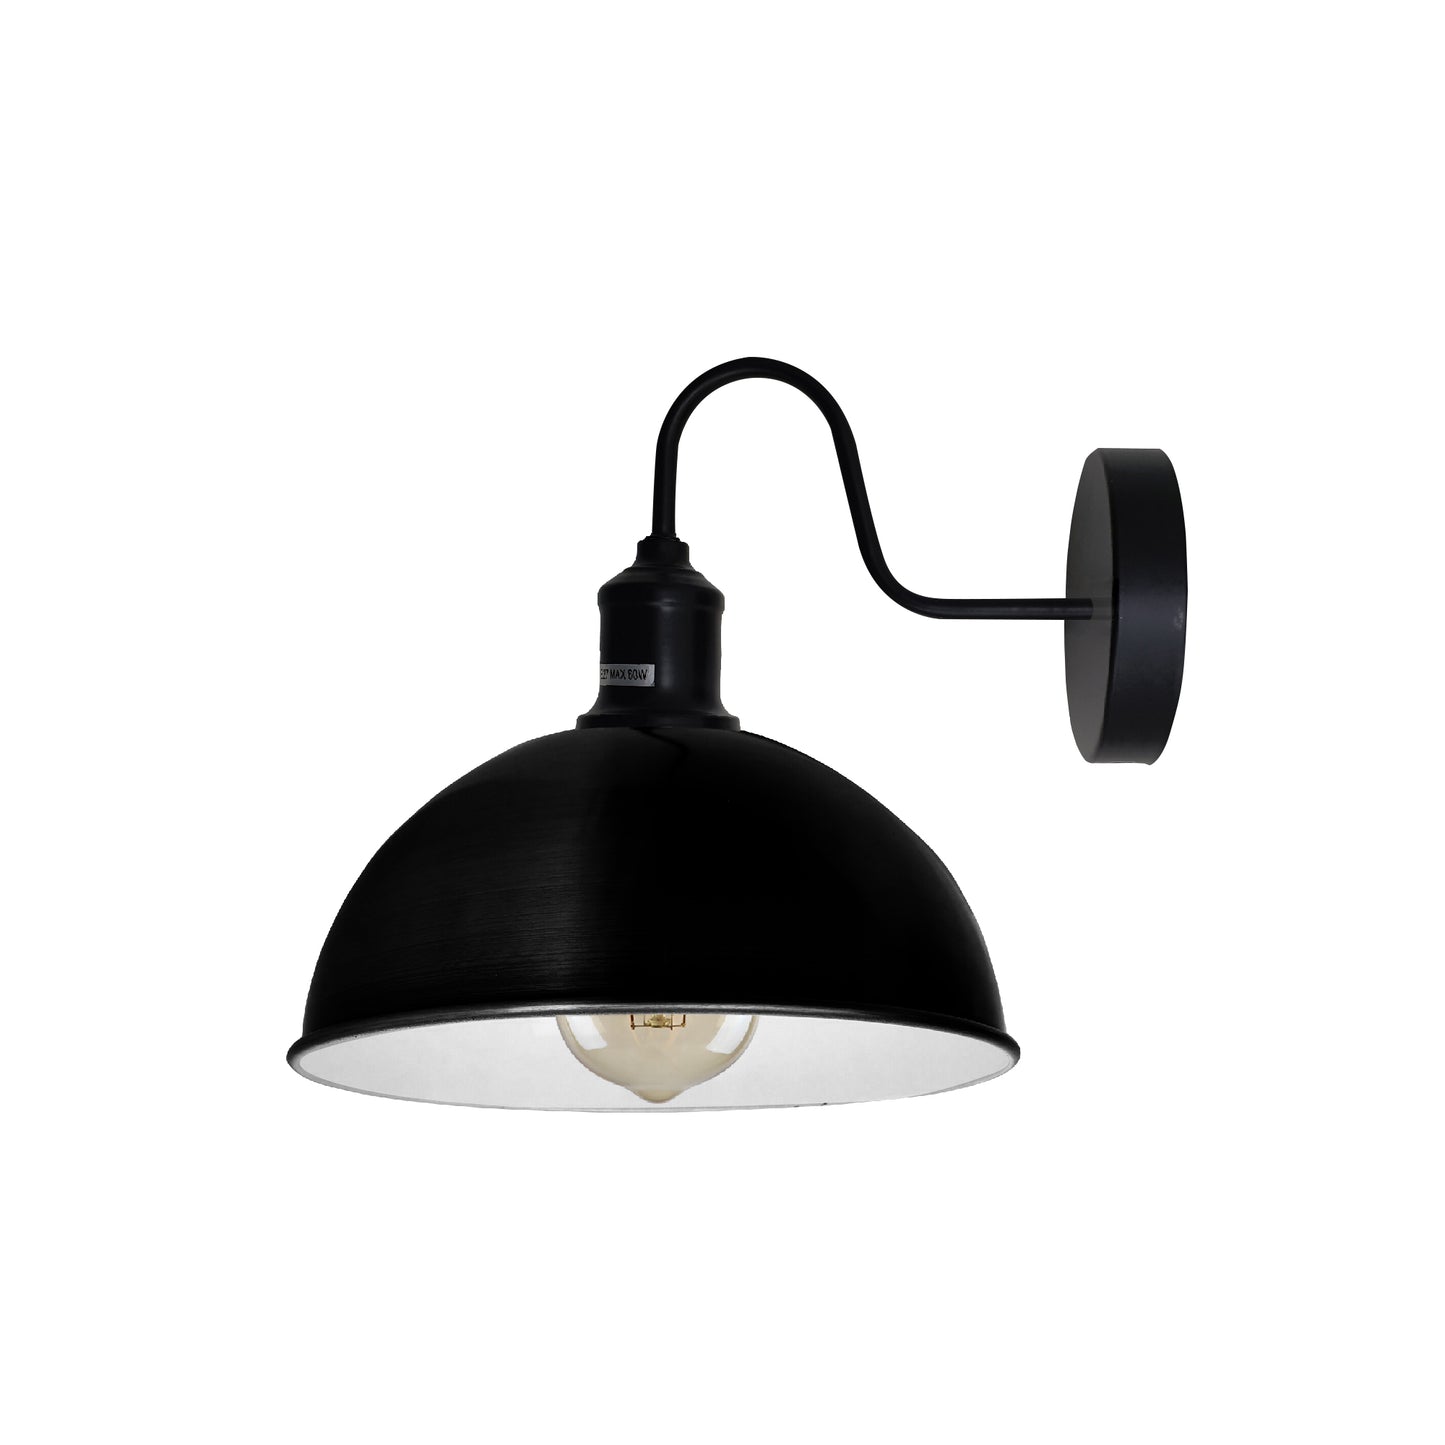 Black wall sconce lamp